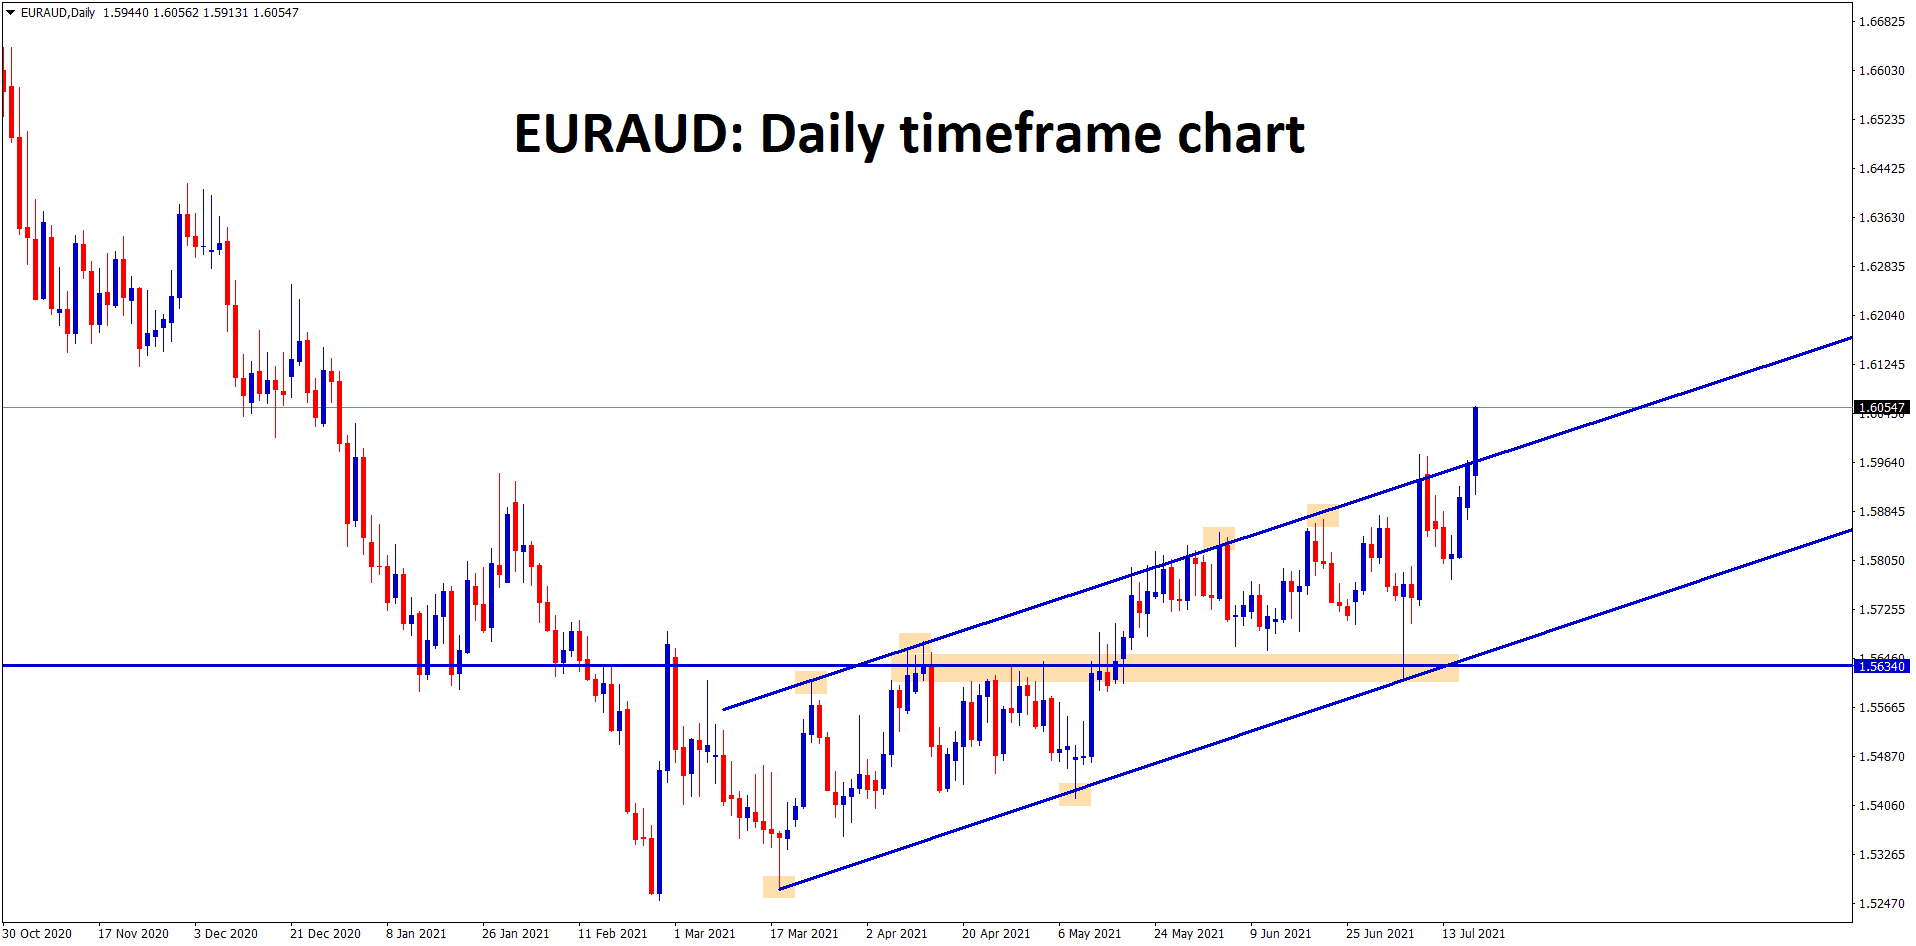 EURAUD continues to move up breaking the higher highs of the uptrend line